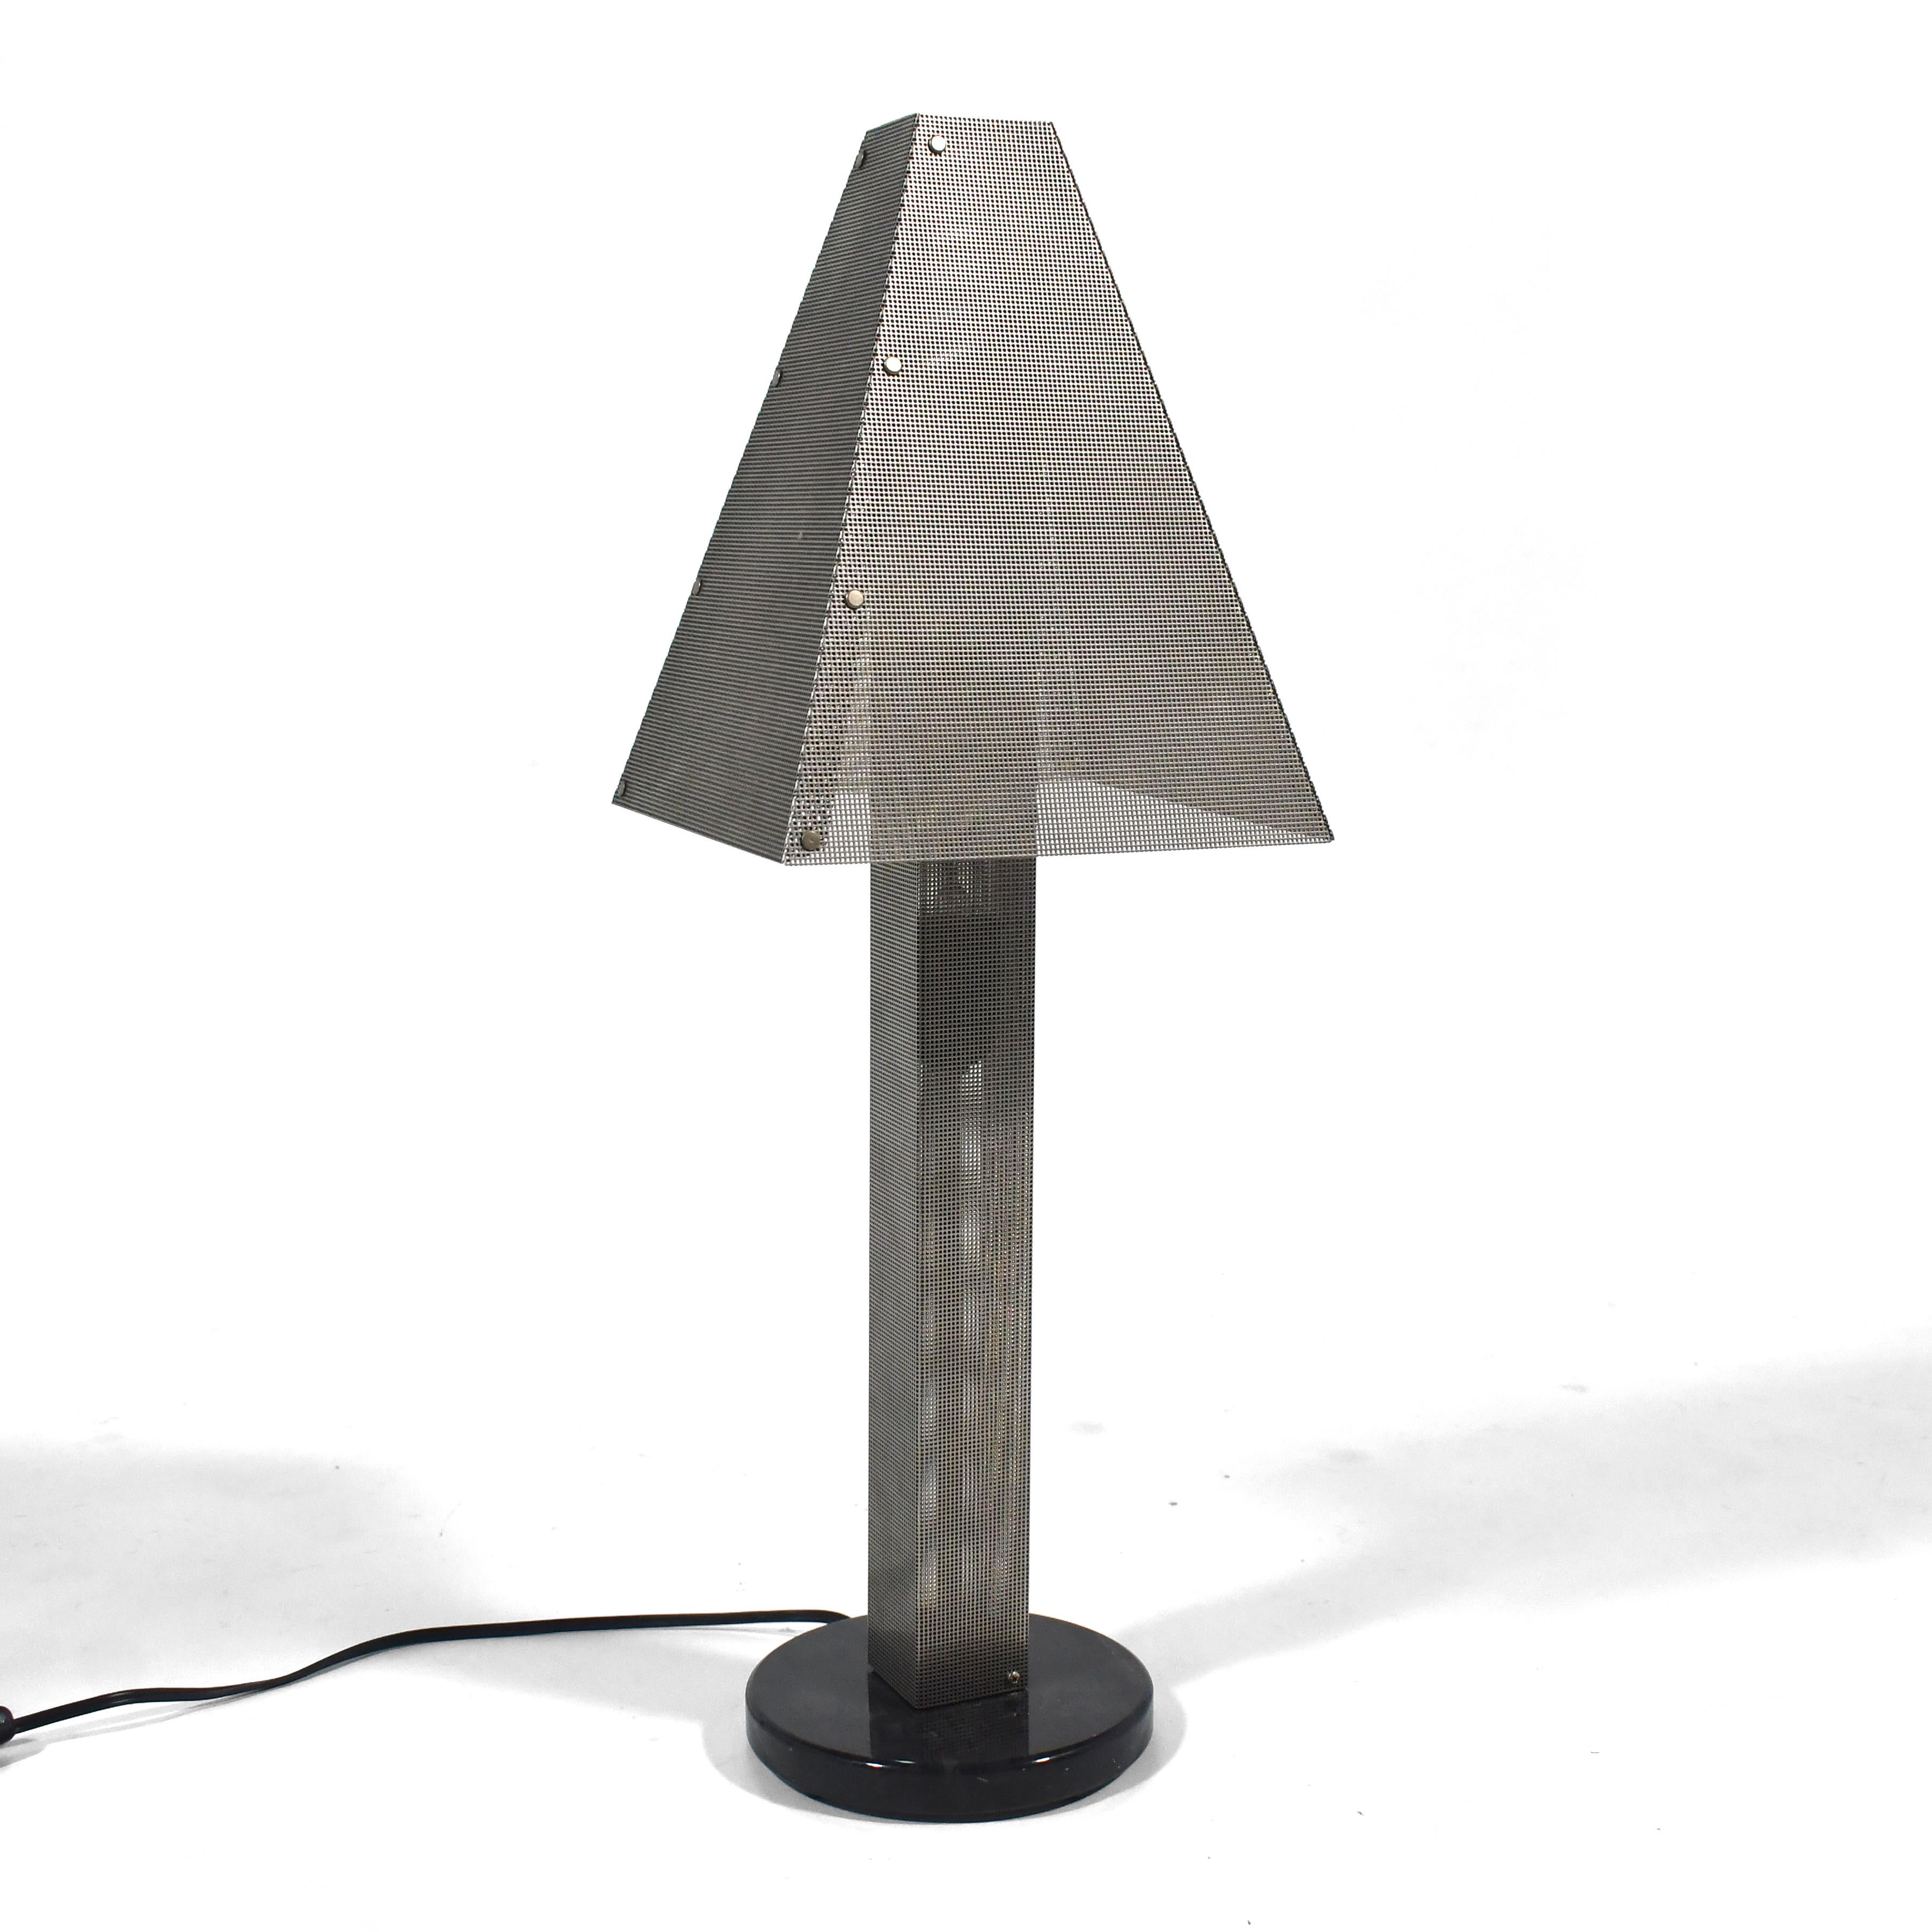 This ingenious post-modern design by Wendy Stephens uses perforated steel as both the lamp and the shade. A bulb inside the body illuminates it from within while the black marble base keeps it stable.

23.25